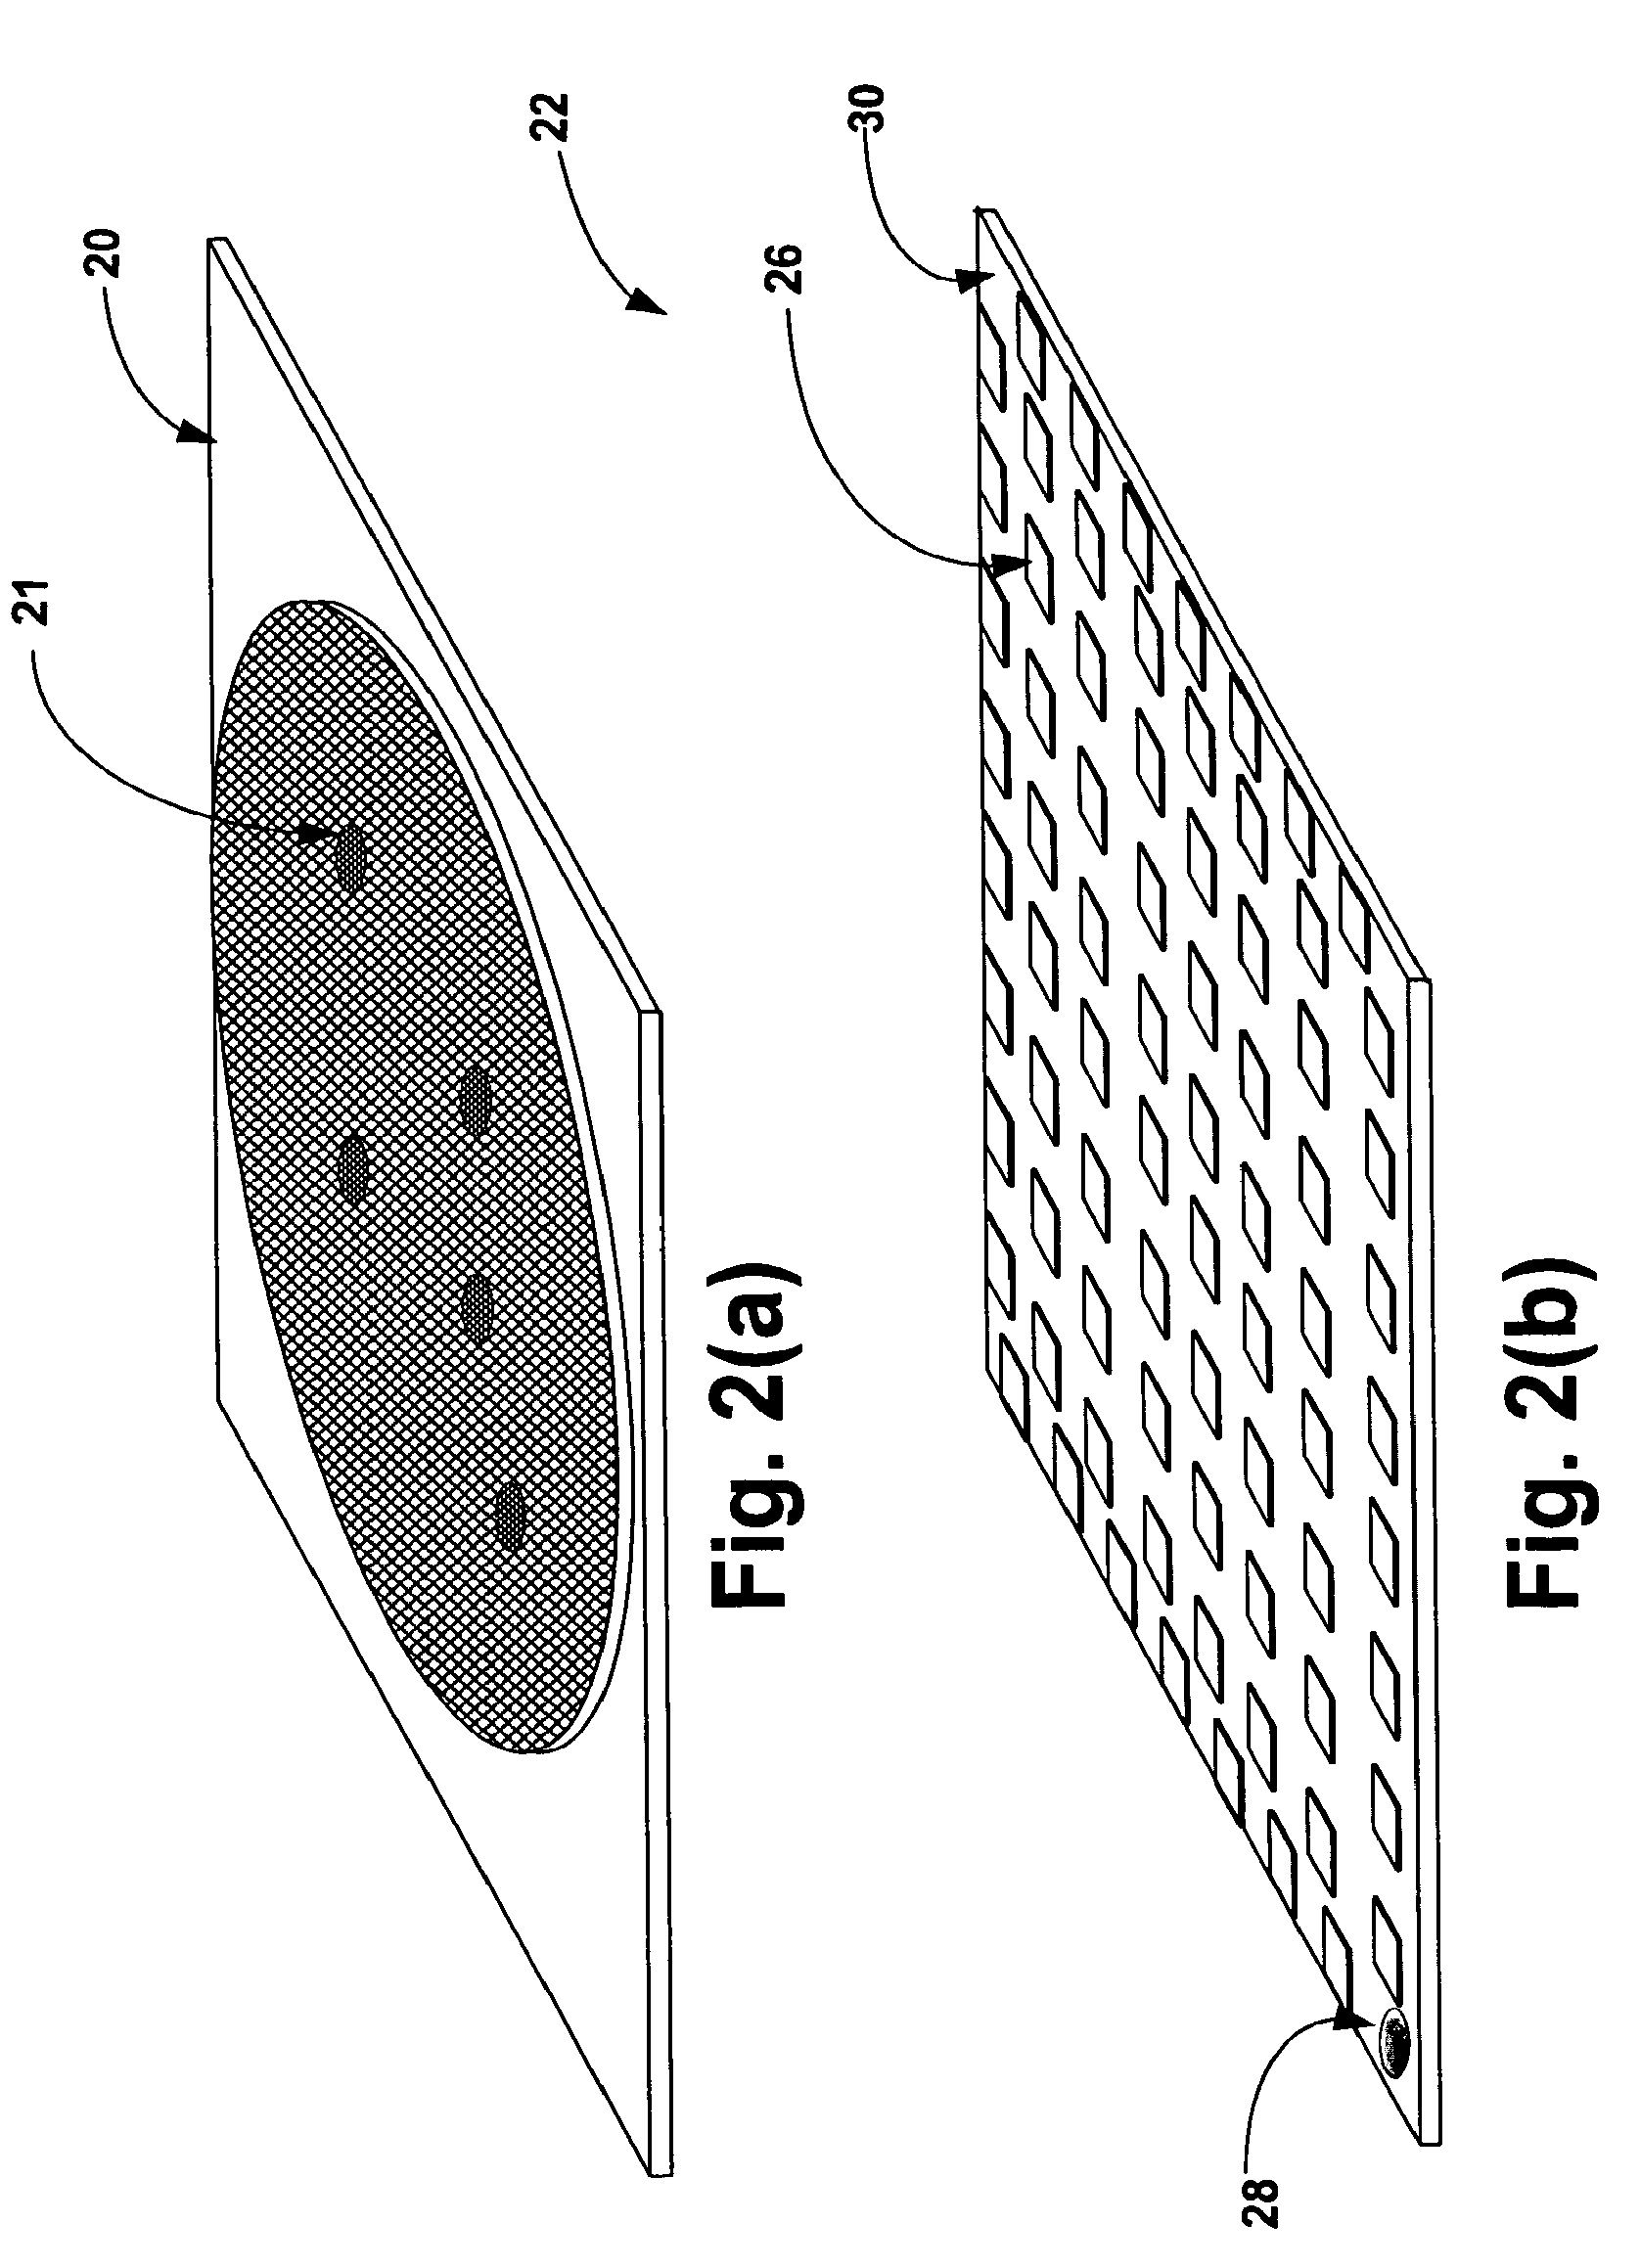 Mitigating heat in an integrated circuit